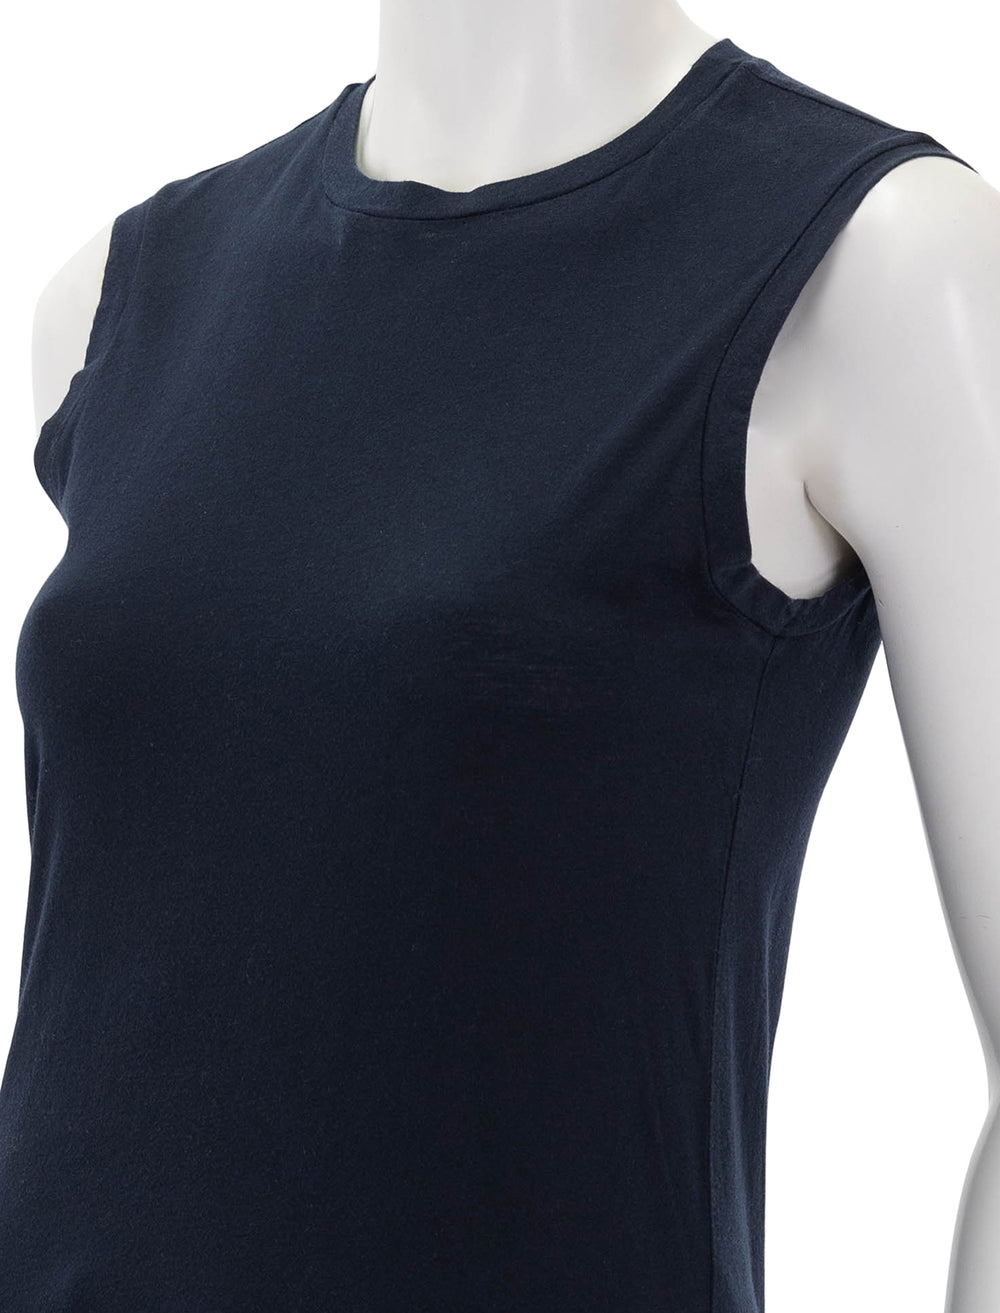 Close-up view of Nili Lotan's muscle tee in navy.